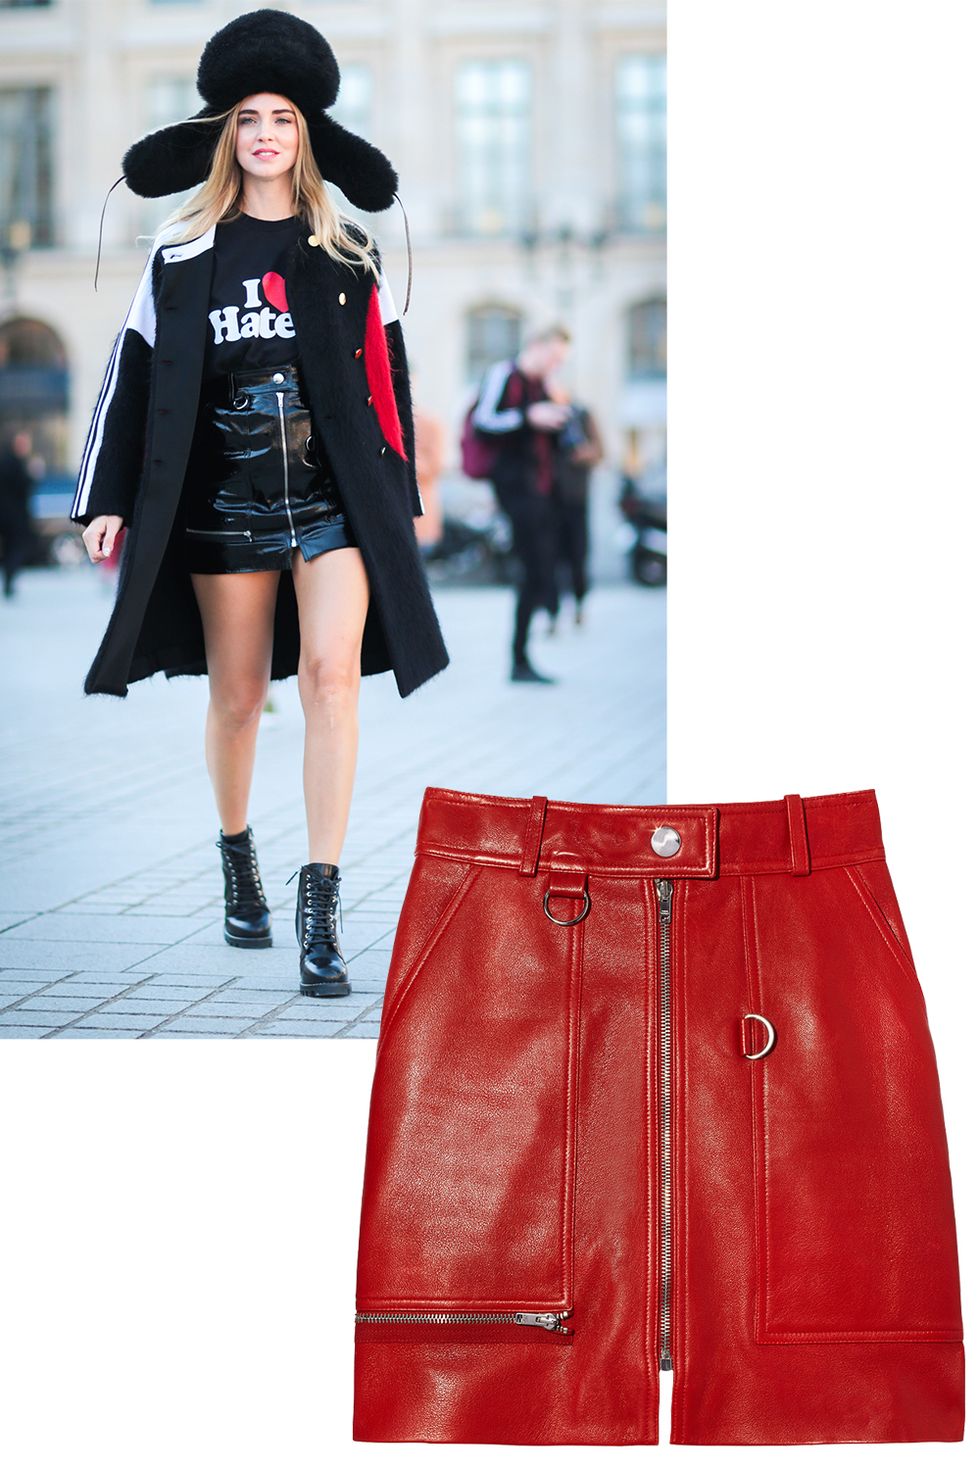 <p>Chiara Ferragni<span class="redactor-invisible-space"> wore a version of this Isabel Marant skirt in every, single, city, demonstrating its versatility.&nbsp;</span></p><p><em data-redactor-tag="em" data-verified="redactor">Isabel Marant skirt, $1,325,<strong data-redactor-tag="strong" data-verified="redactor"><a href="https://shop.harpersbazaar.com/i/isabel-marant/franck-leather-mini-skirt-10014.html" target="_blank">shopBAZAAR.com</a></strong>.</em></p><p><span class="redactor-invisible-space"></span></p>